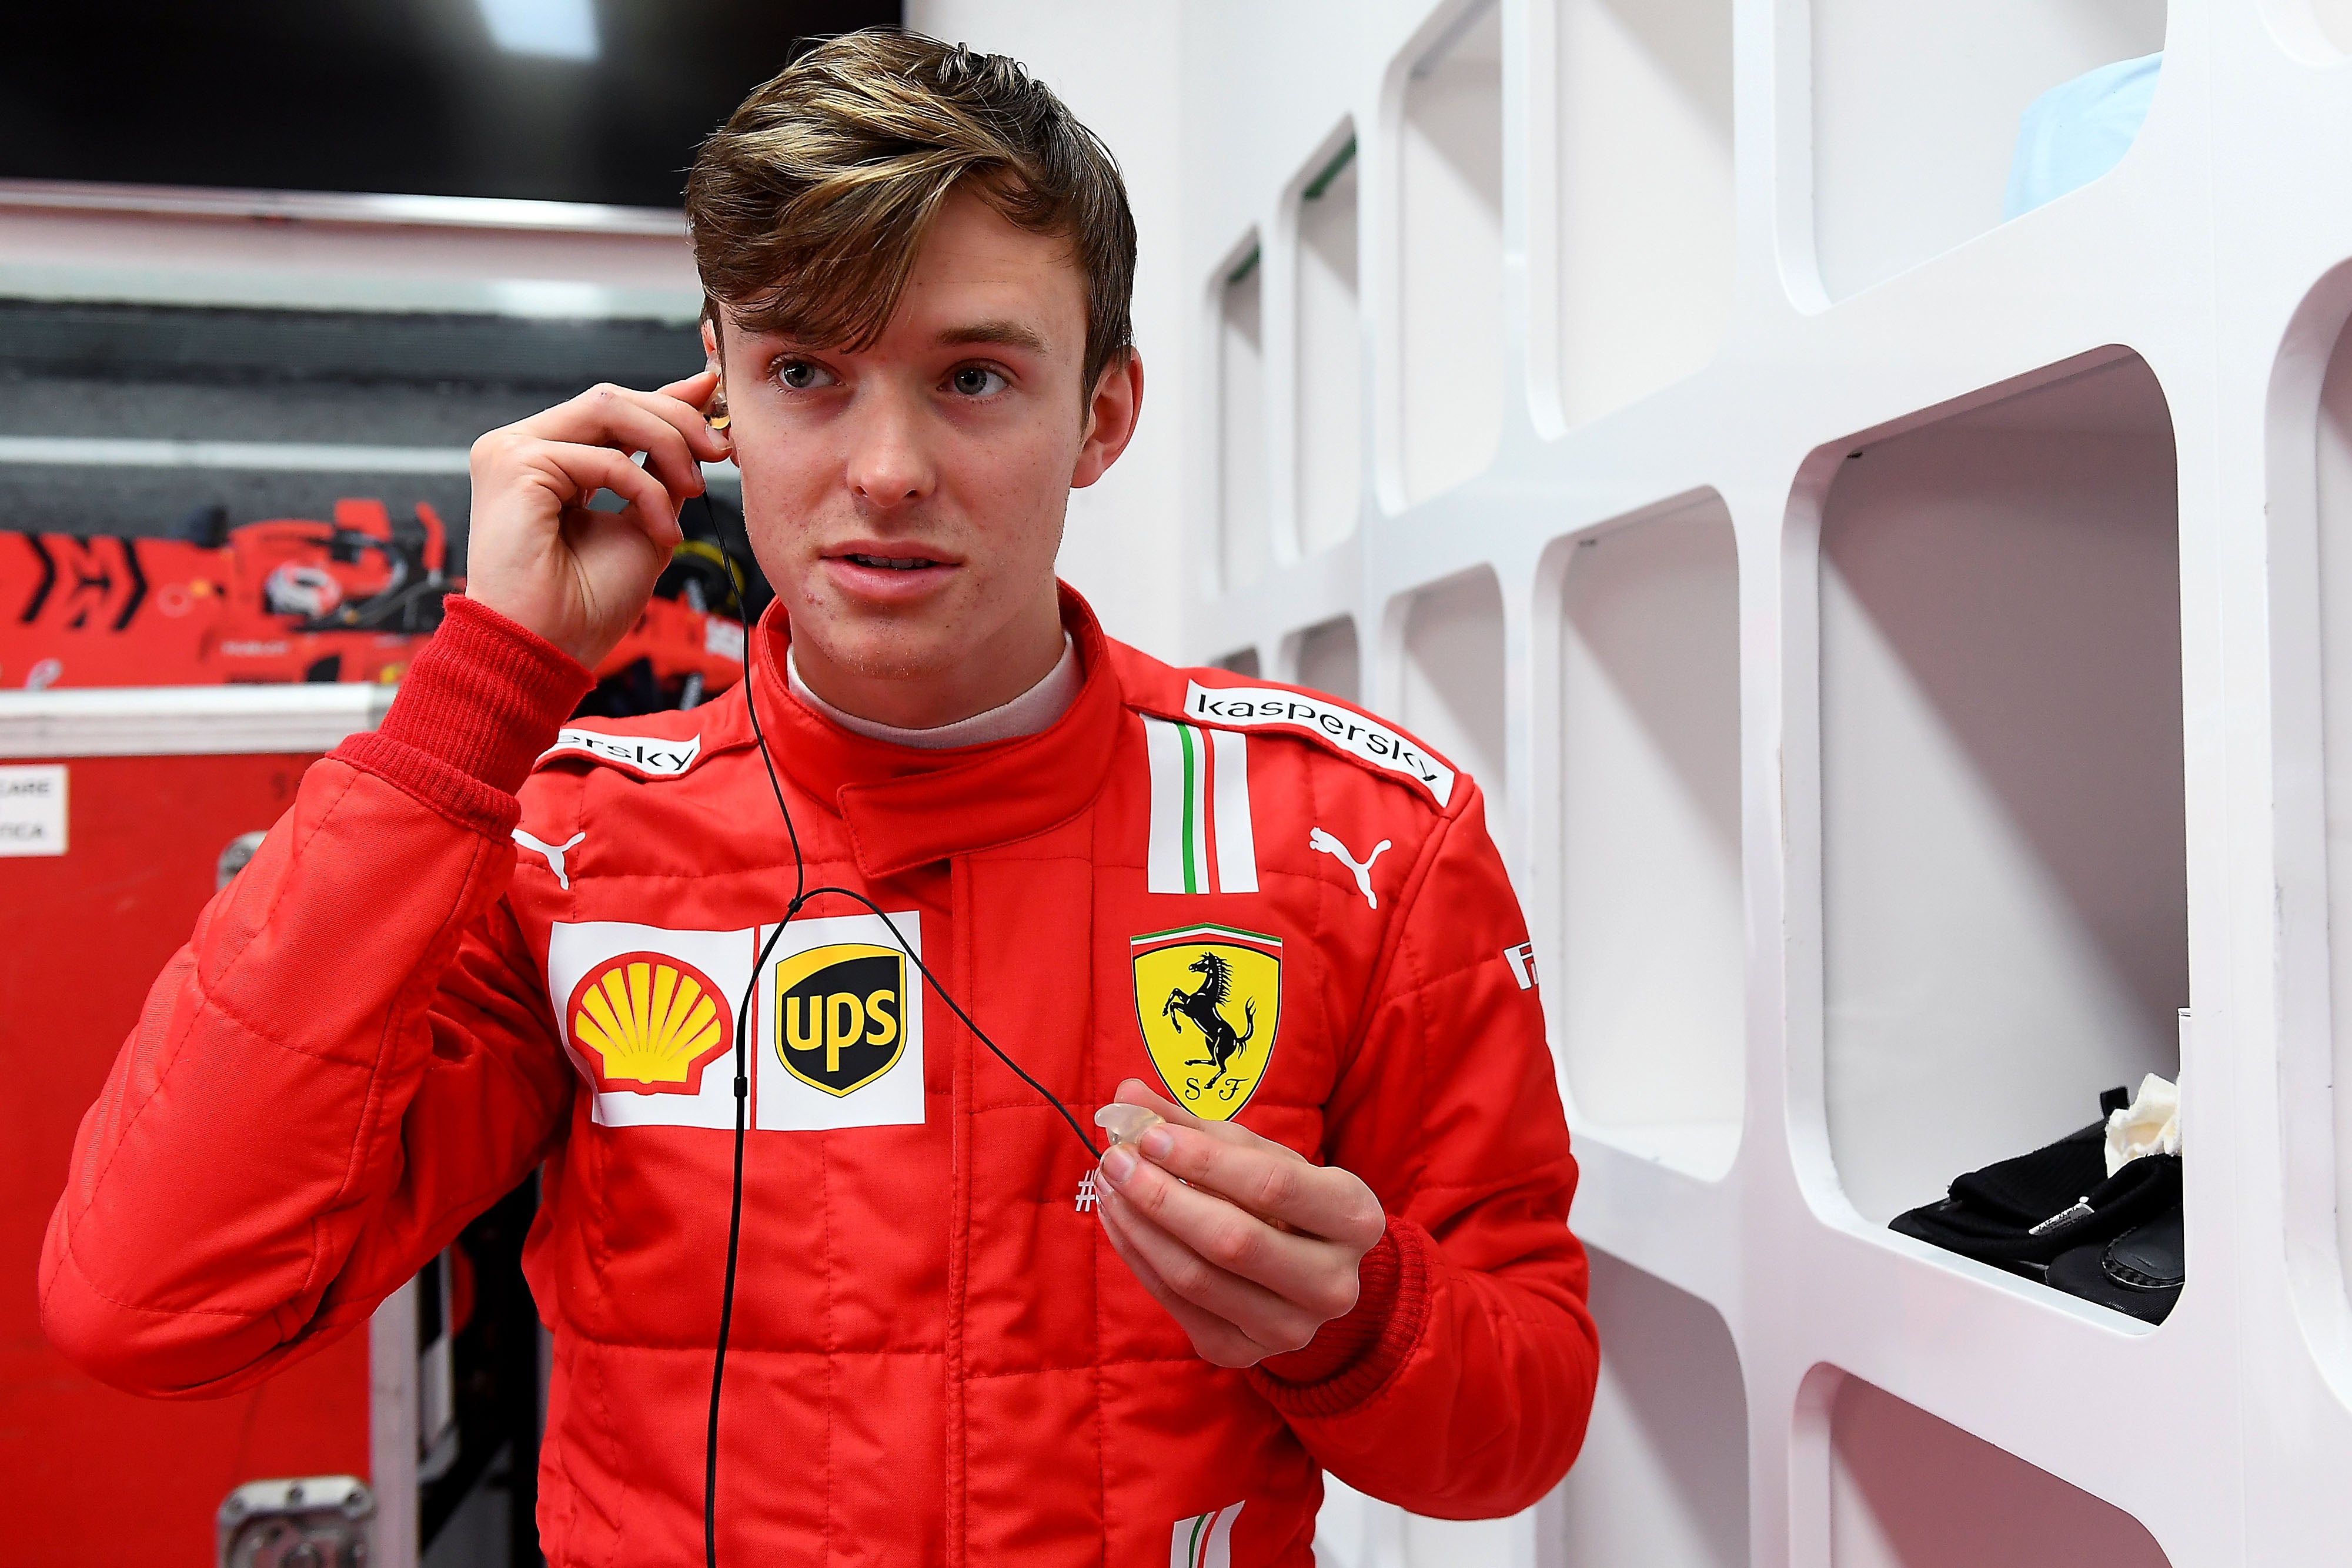 Callum Ilott is hoping to follow in the footsteps of Ferrari’s Charles Leclerc